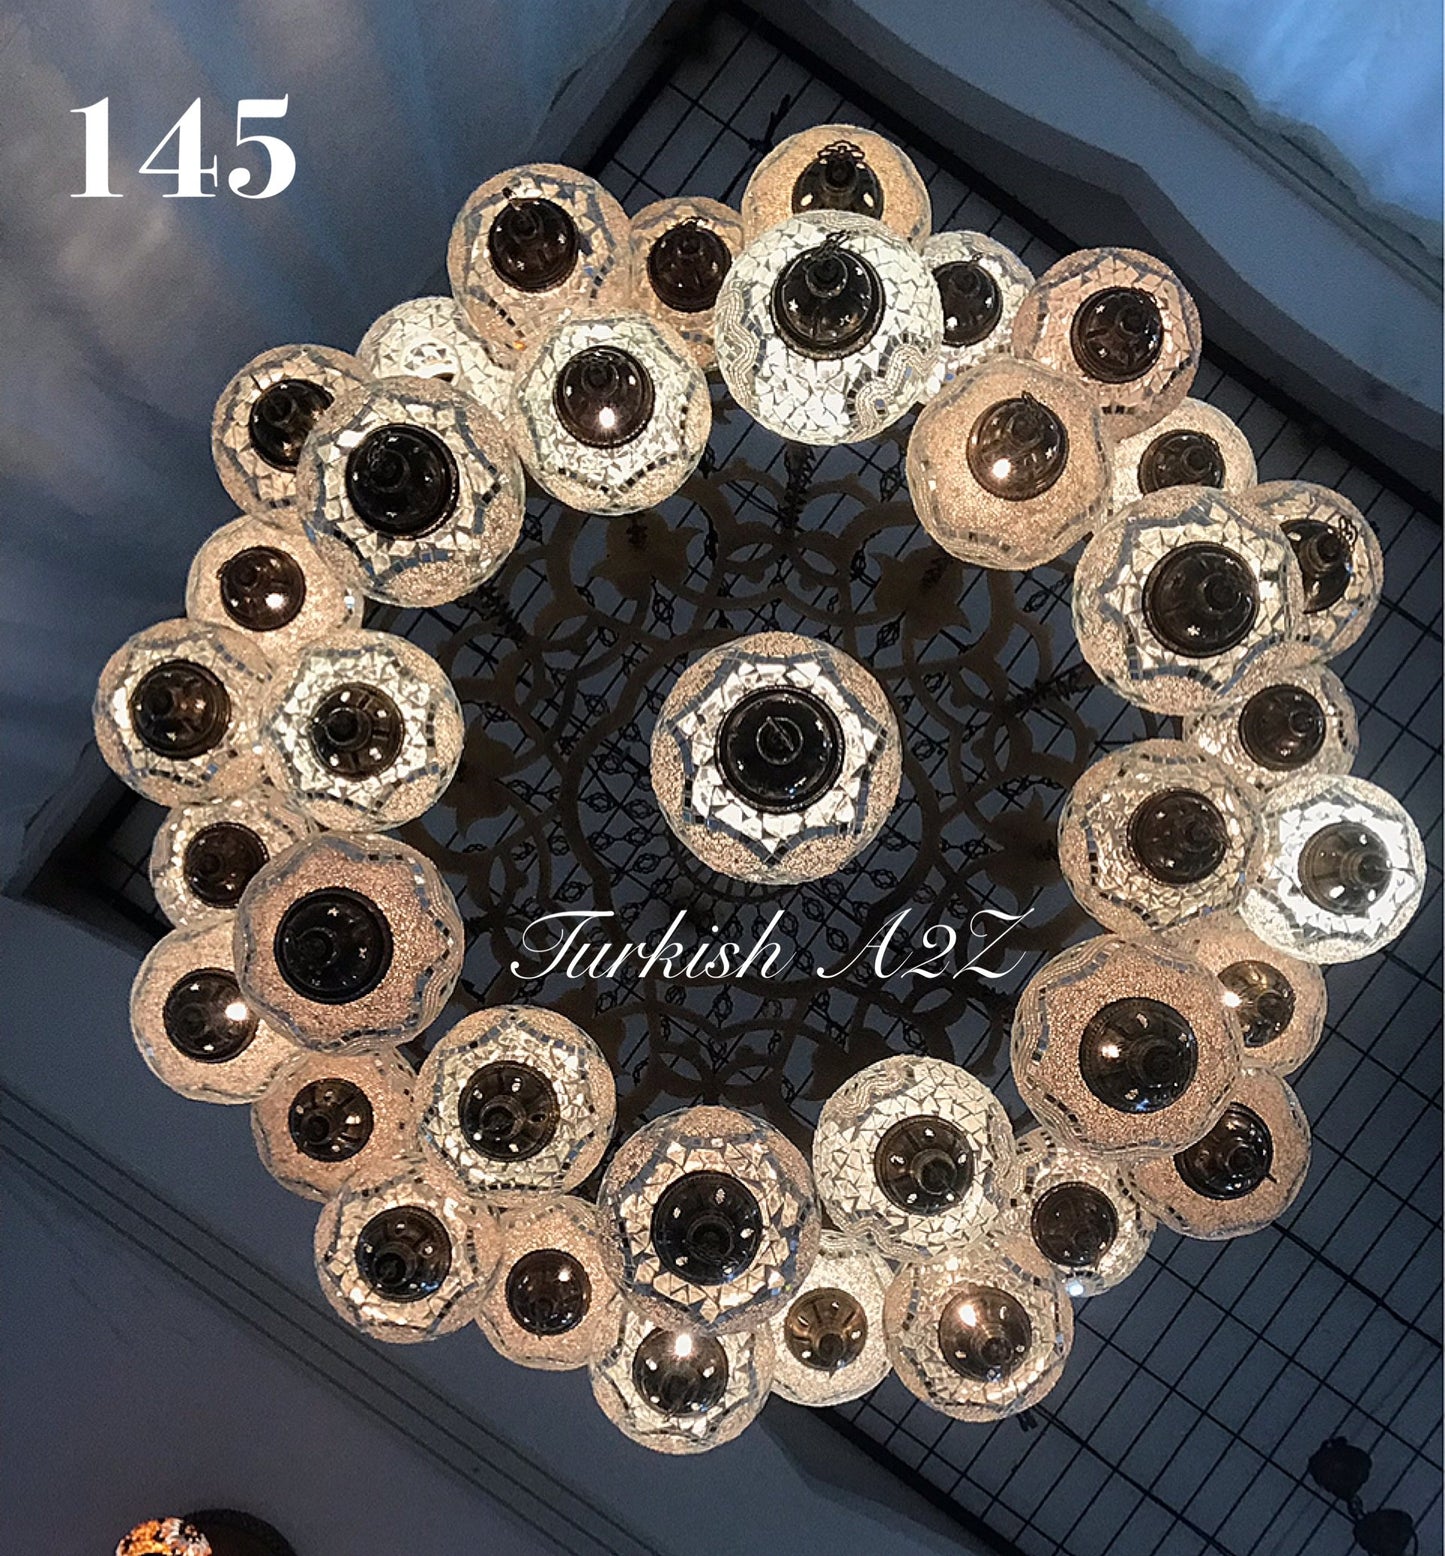 Turkish Mosaic Chandelier With 37 Large Globes  ,ID: 145, FREE SHIPPING